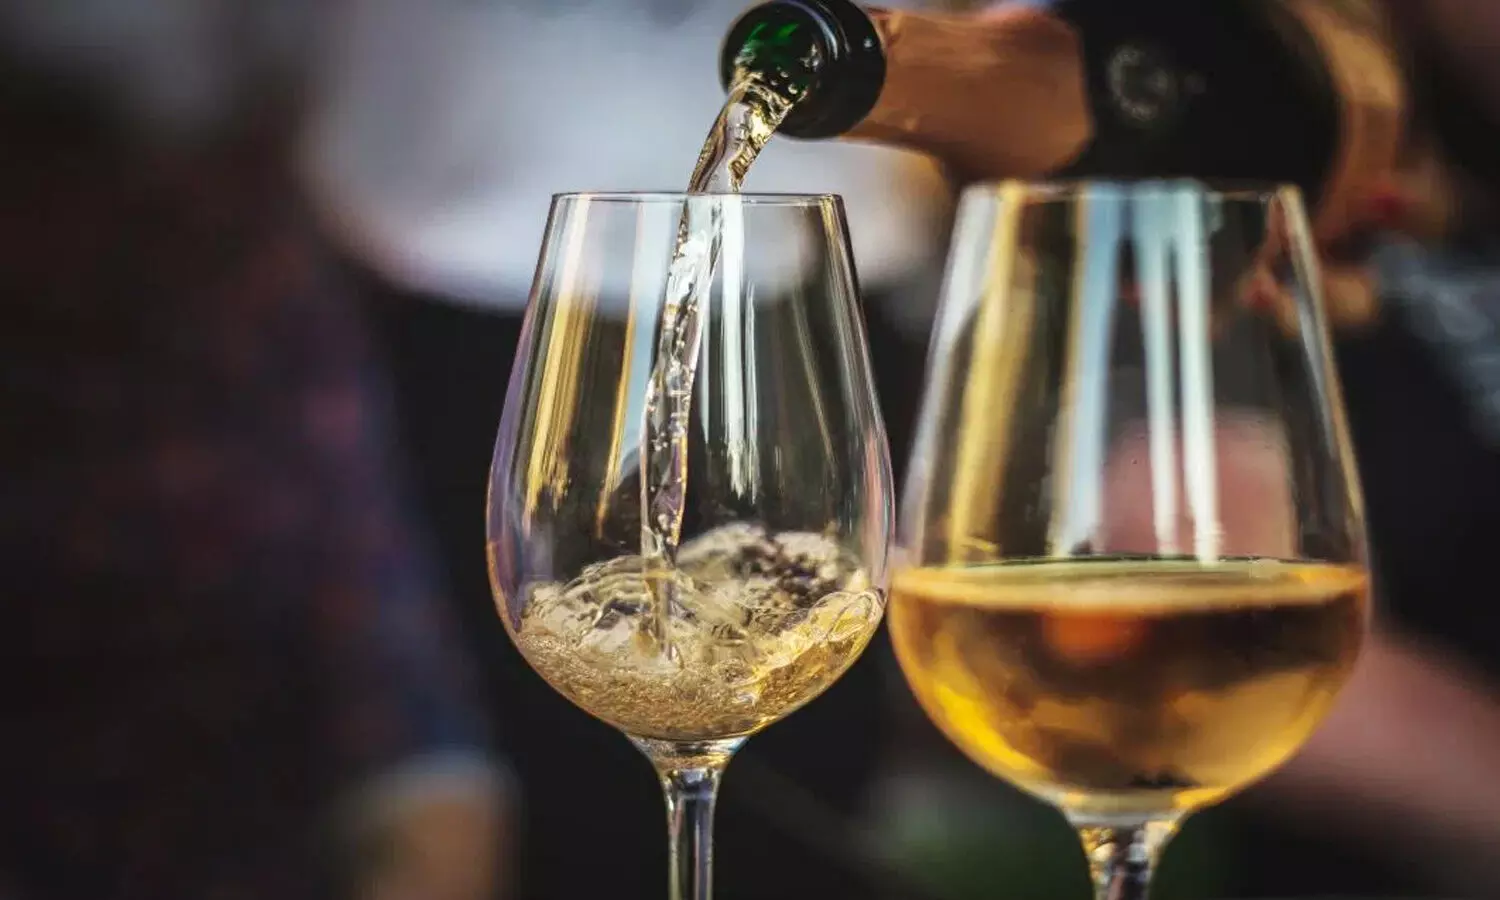 Even light to moderate drinking can lead to cancer, finds WHO study